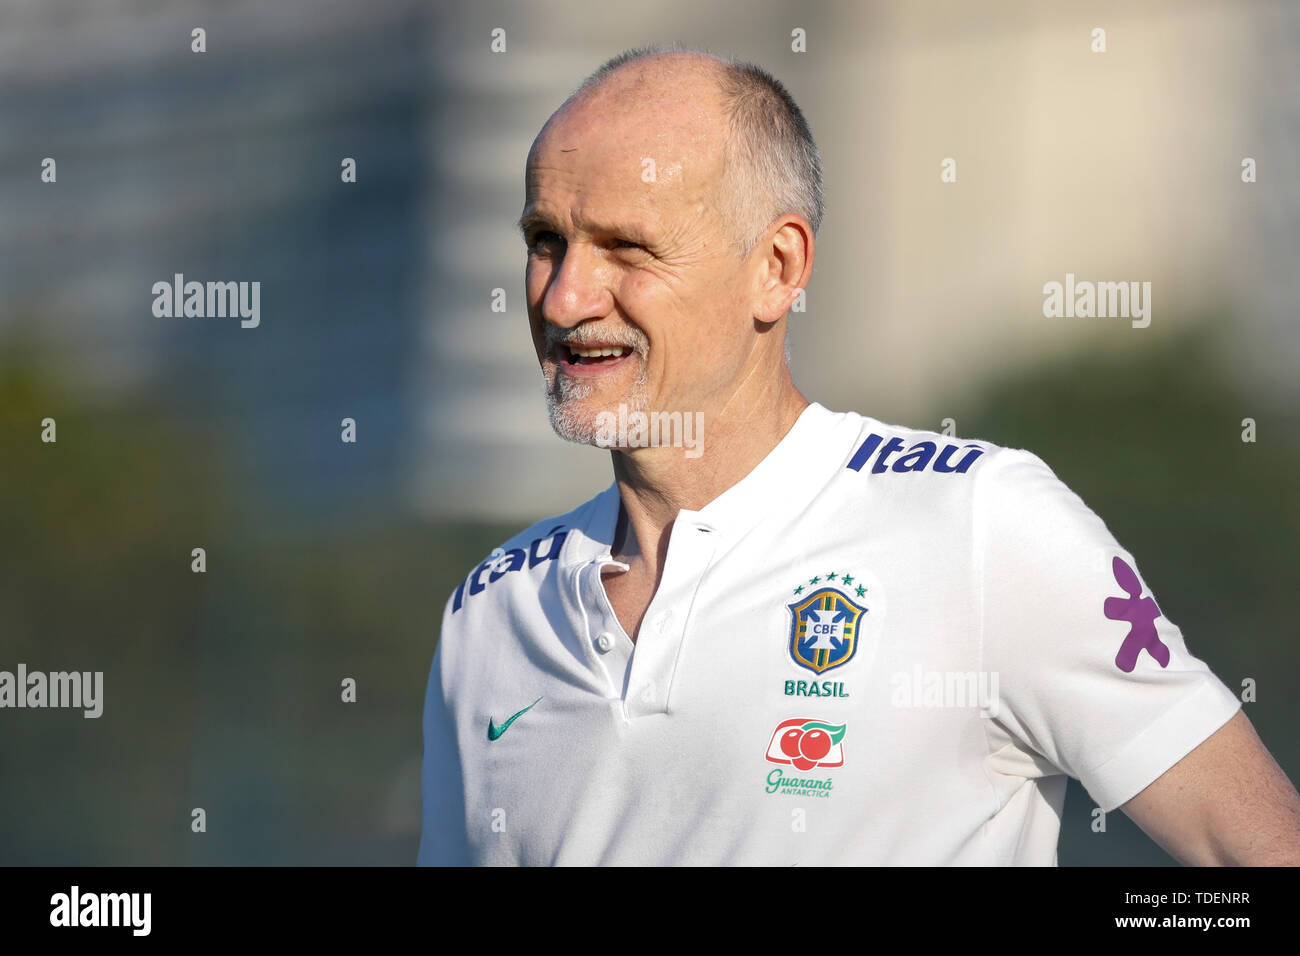 Sao Paulo, Brazil. 15th June, 2019. Goalkeeper coach Claudio Taffarel during training at the Brazilian Football Academy, Palmeiras training center, located in the district of Barra Funda in São Paulo (SP). The squad begins preparations to face Venezuela in the second match of the Copa America 2019 next Tuesday (18). Credit: Foto Arena LTDA/Alamy Live News Stock Photo